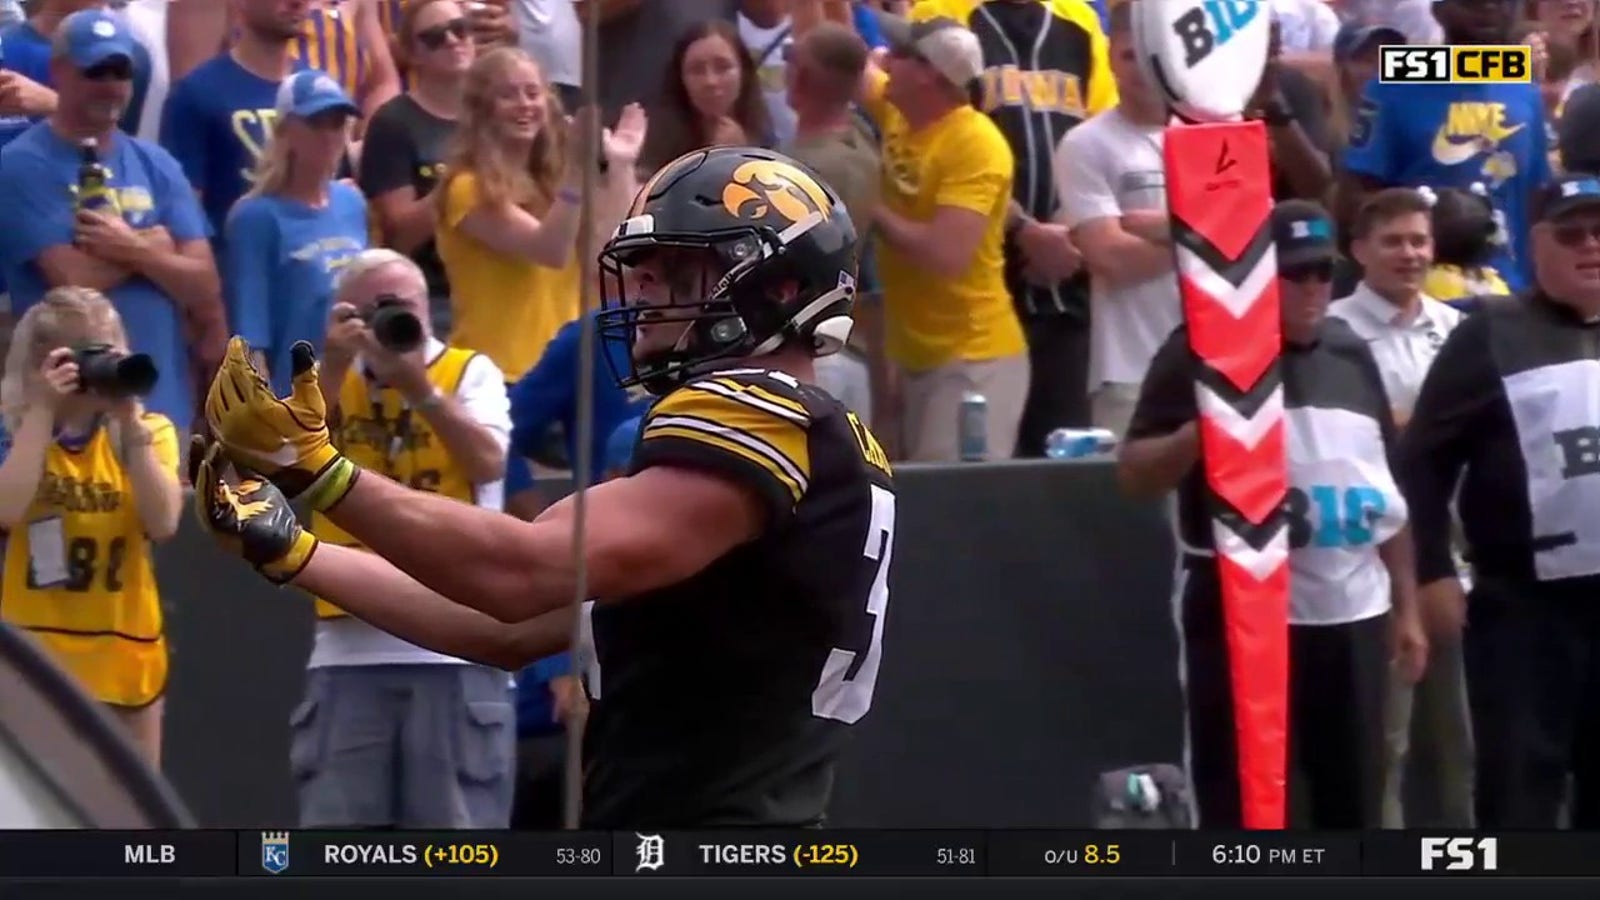 Iowa takes a 5-3 lead on Jack Campbell's safety